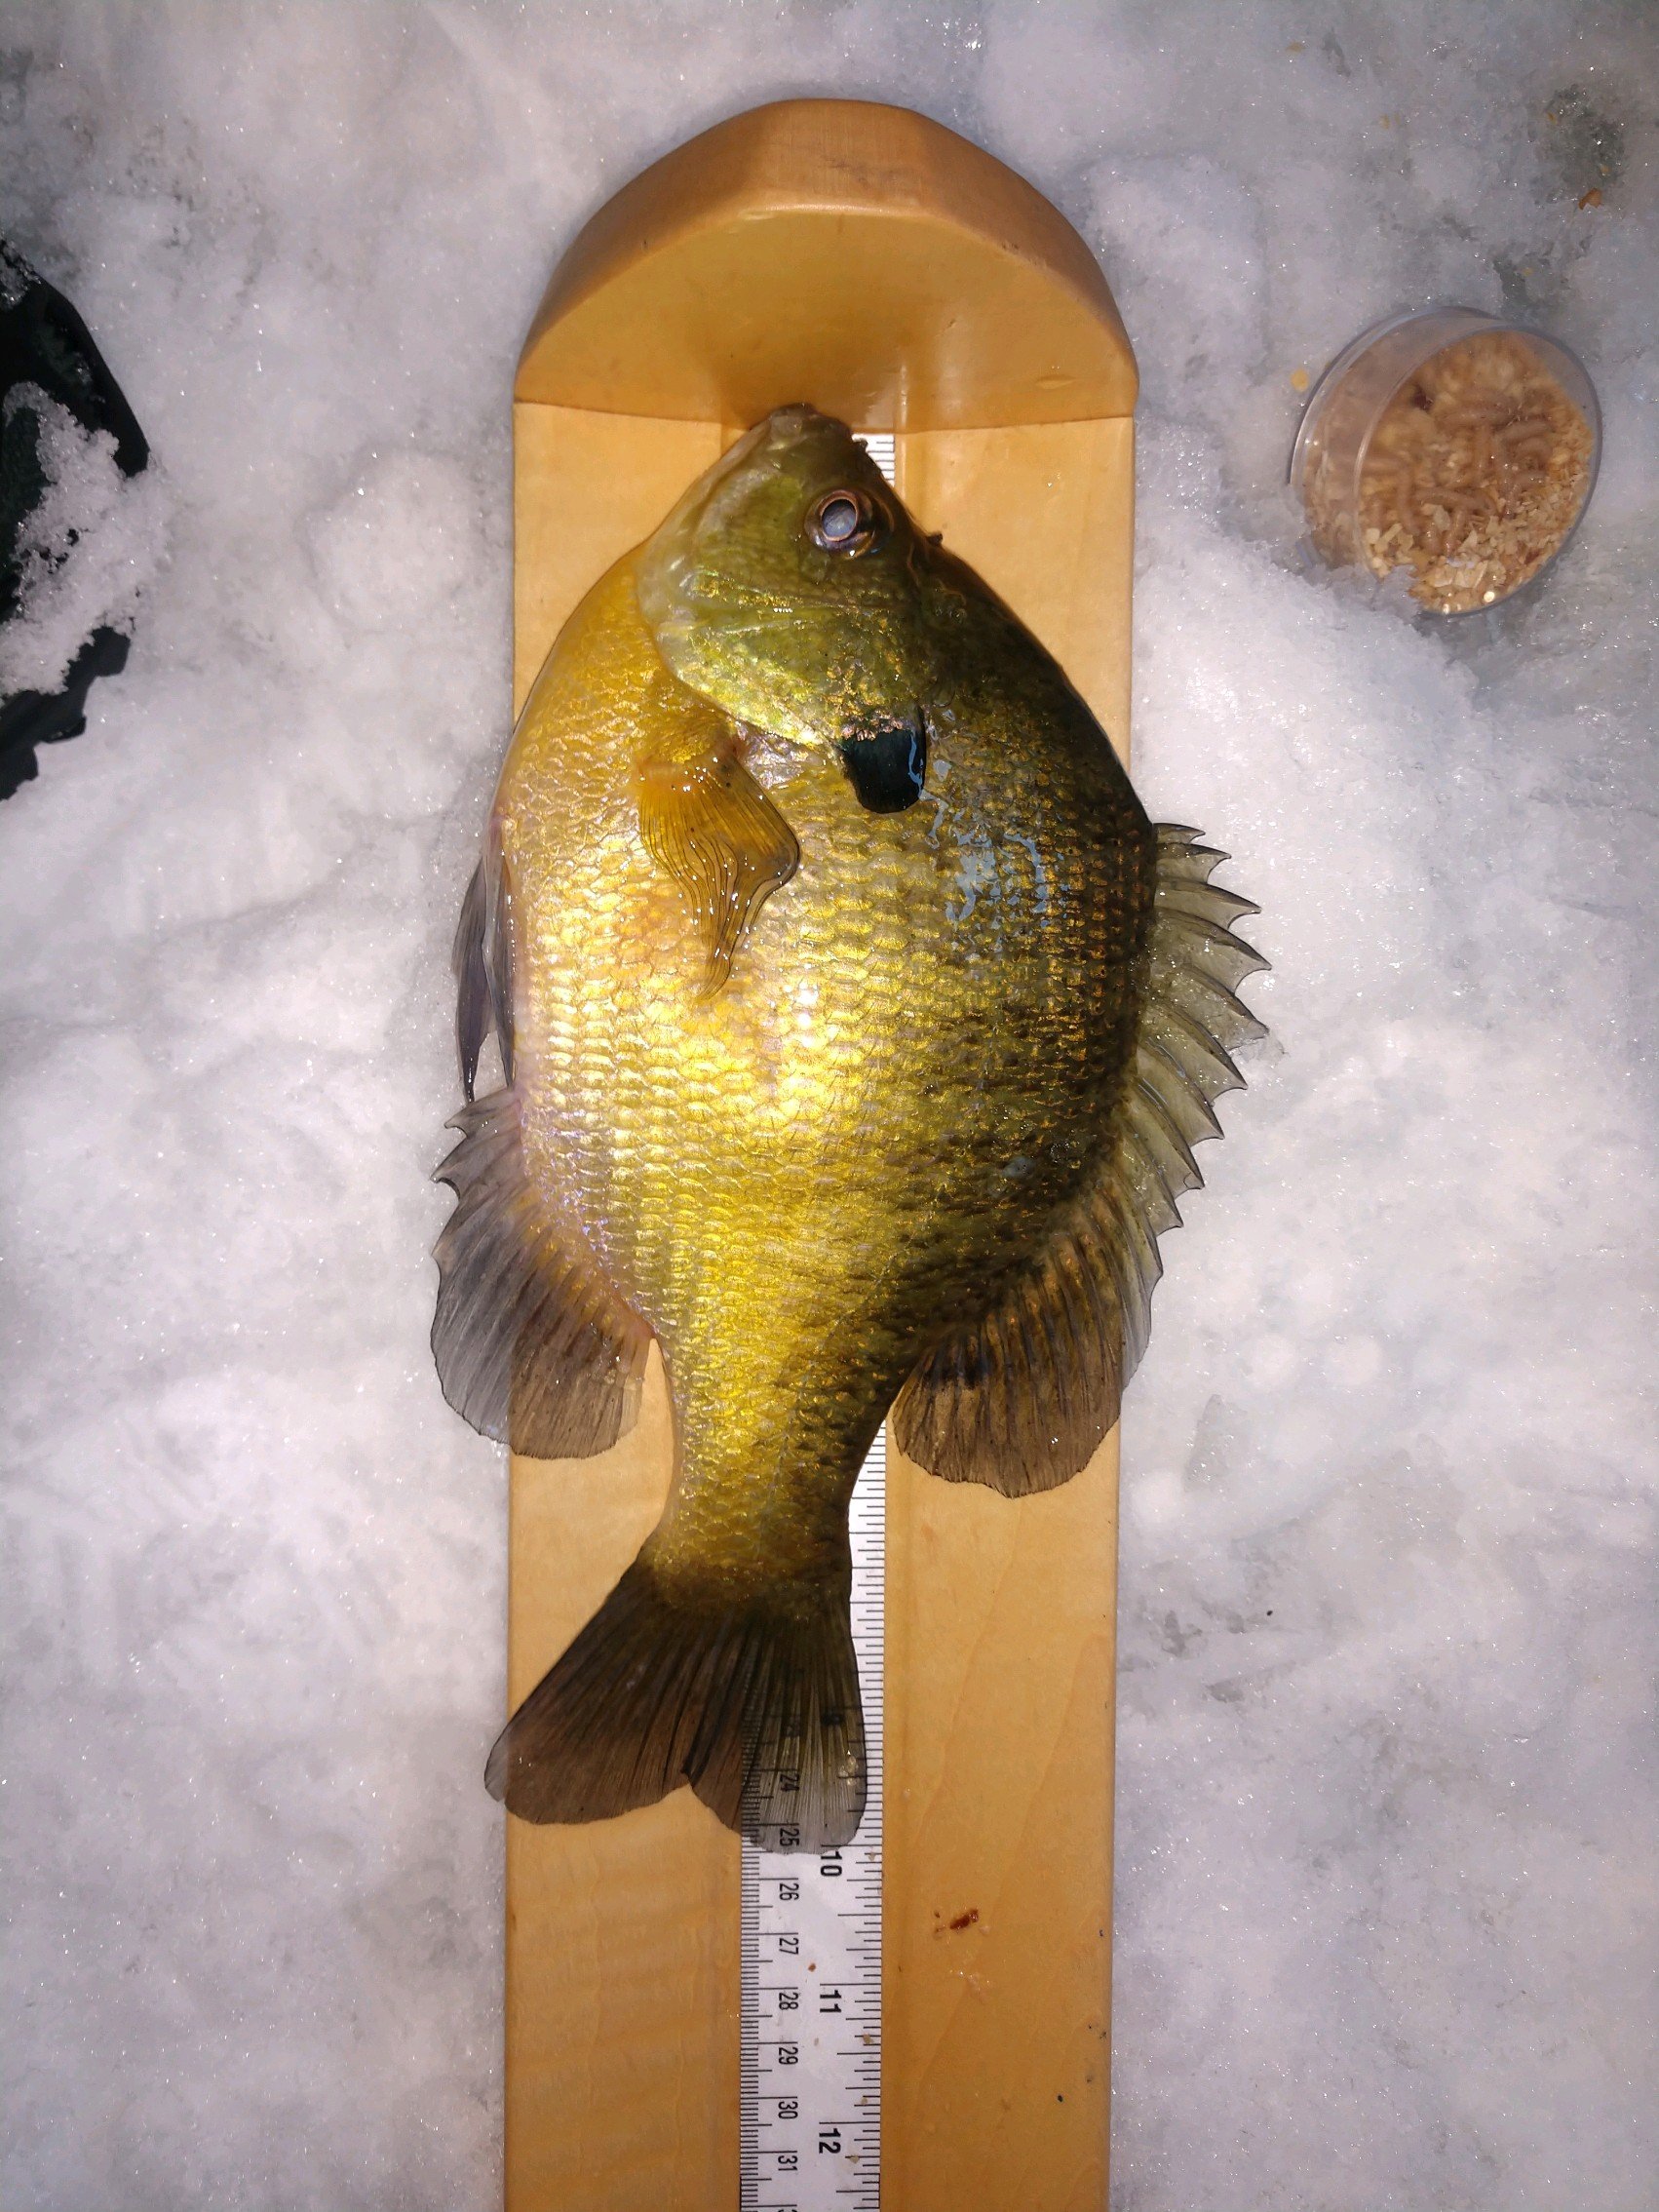 Looking for a new bump board. - Ice Fishing Forum - Ice Fishing Forum